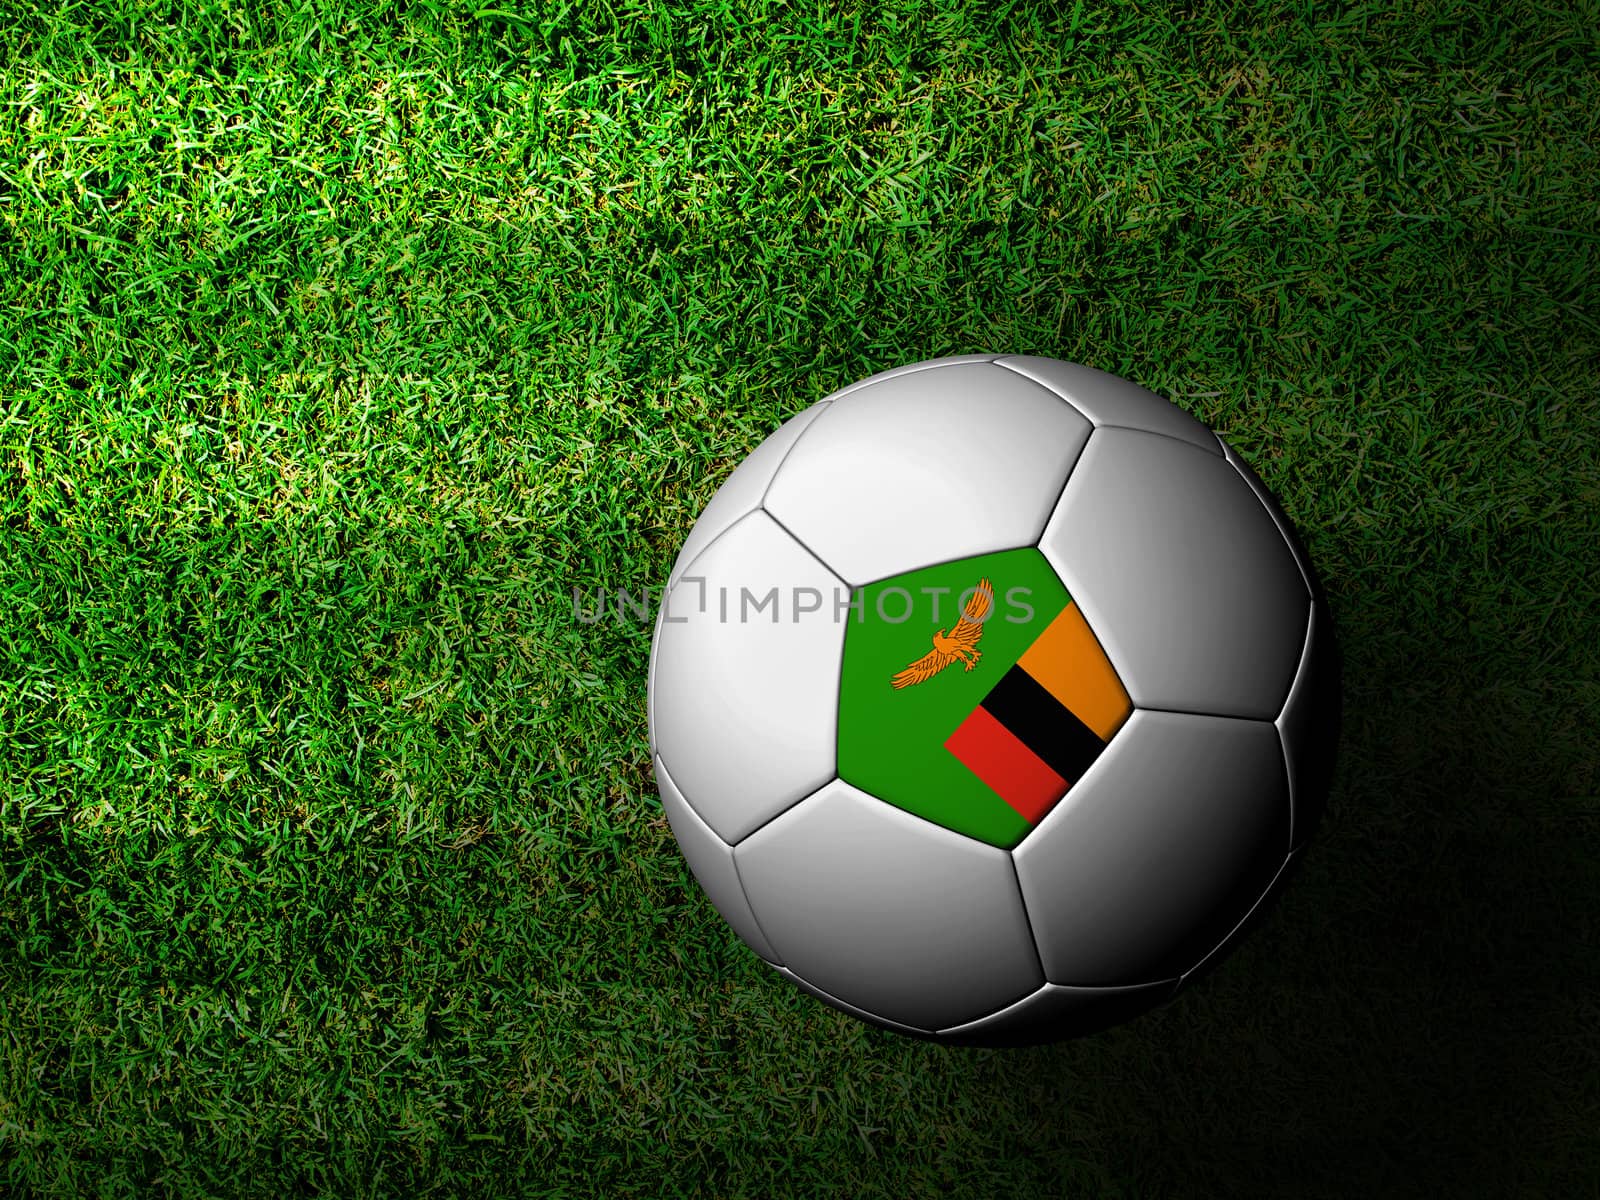 Zambia Flag Pattern 3d rendering of a soccer ball in green grass by jakgree